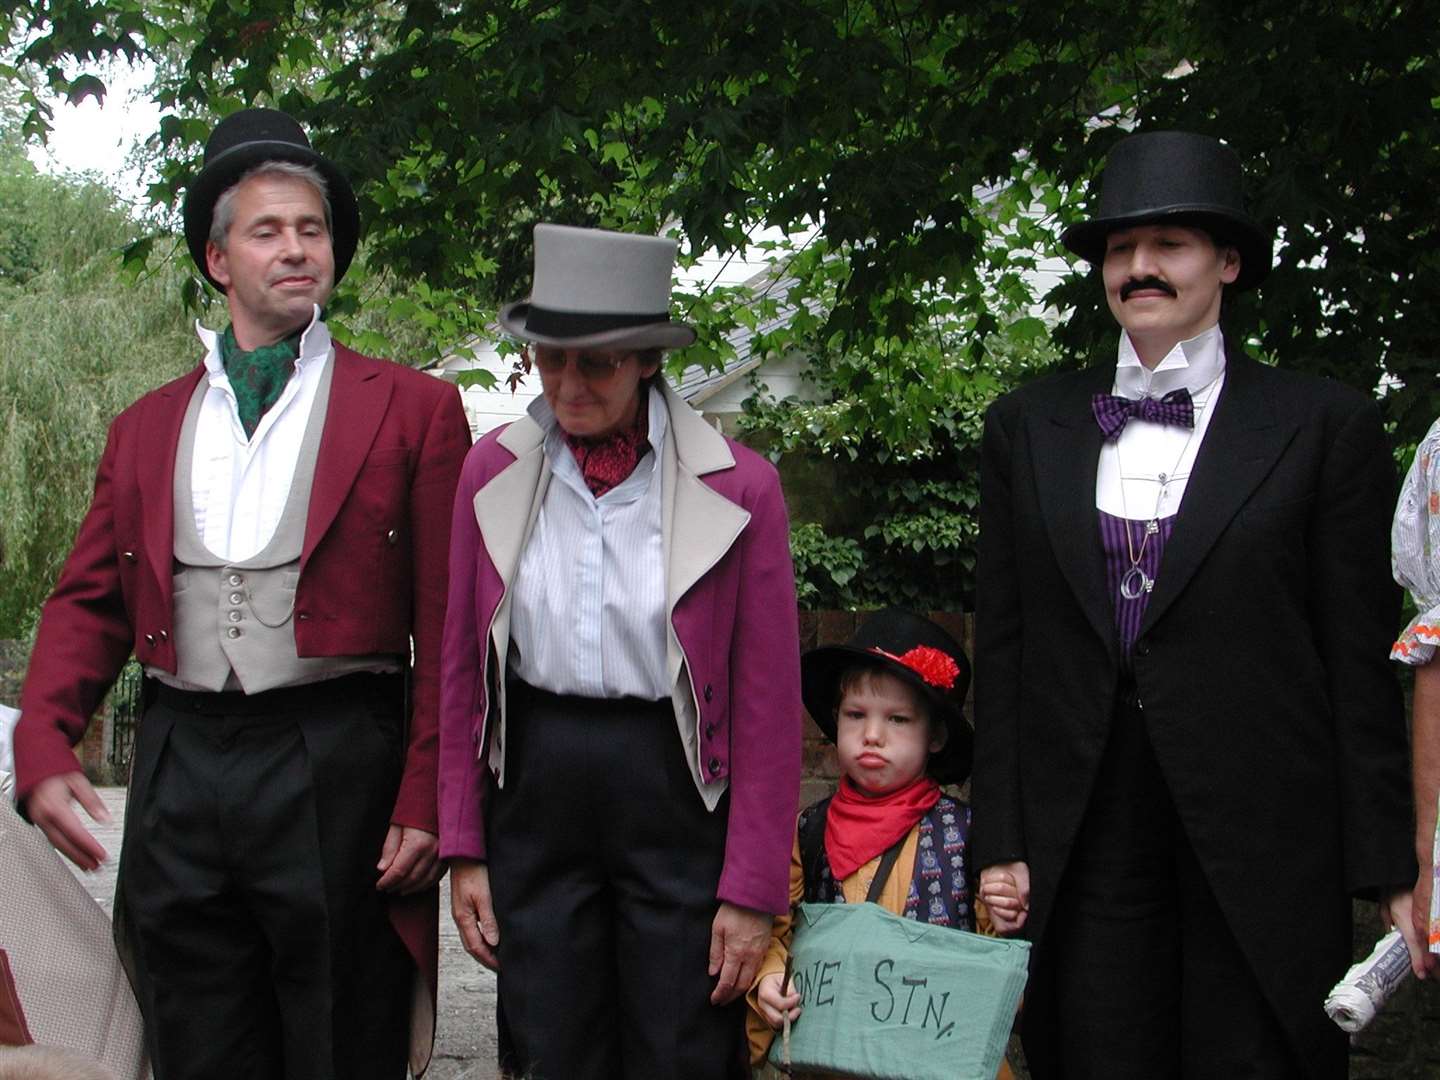 The Loose Valley Pageant telling the story of opposition to the Loose Valley Railway, with Alan Smith, Maggie Davis, Thomas Smith (as Tovil Station) and Teresa Rogers